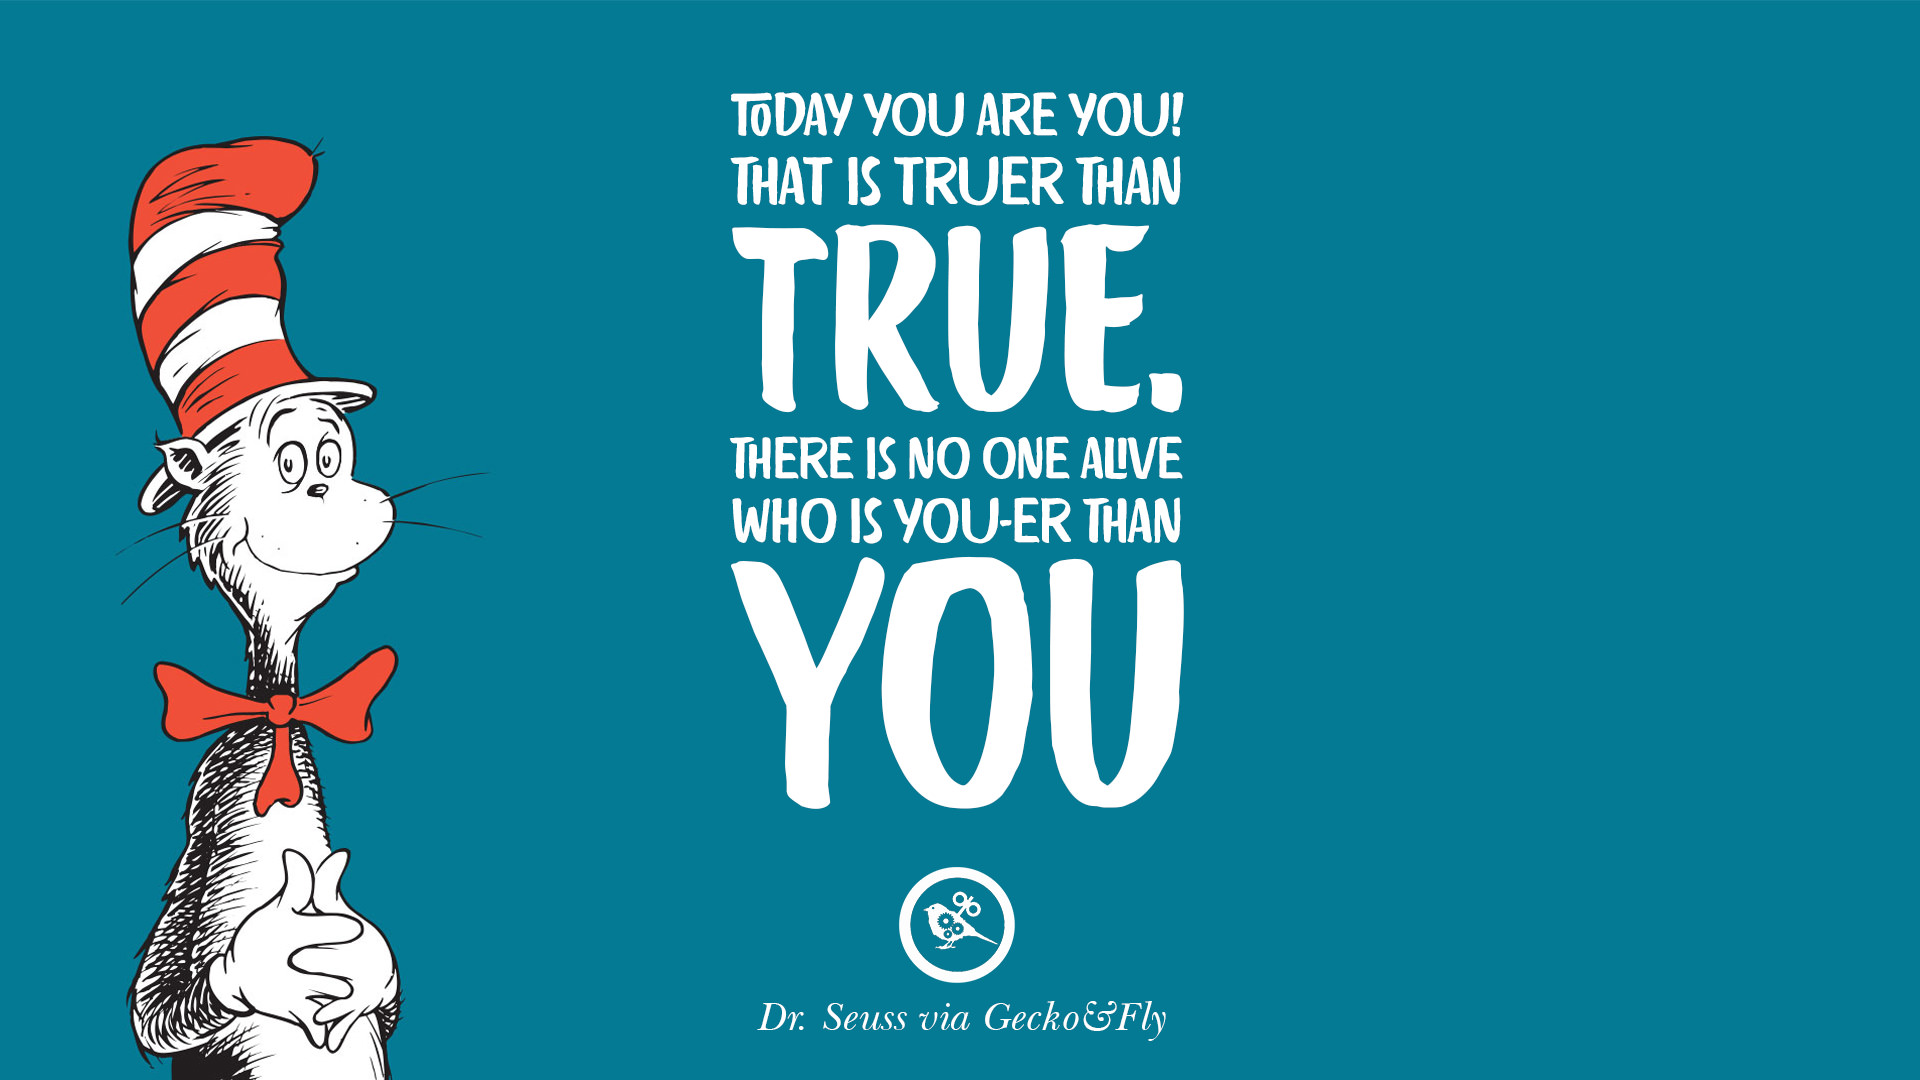 Amazing Dr Seuss Quotes About Life of the decade Learn more here 